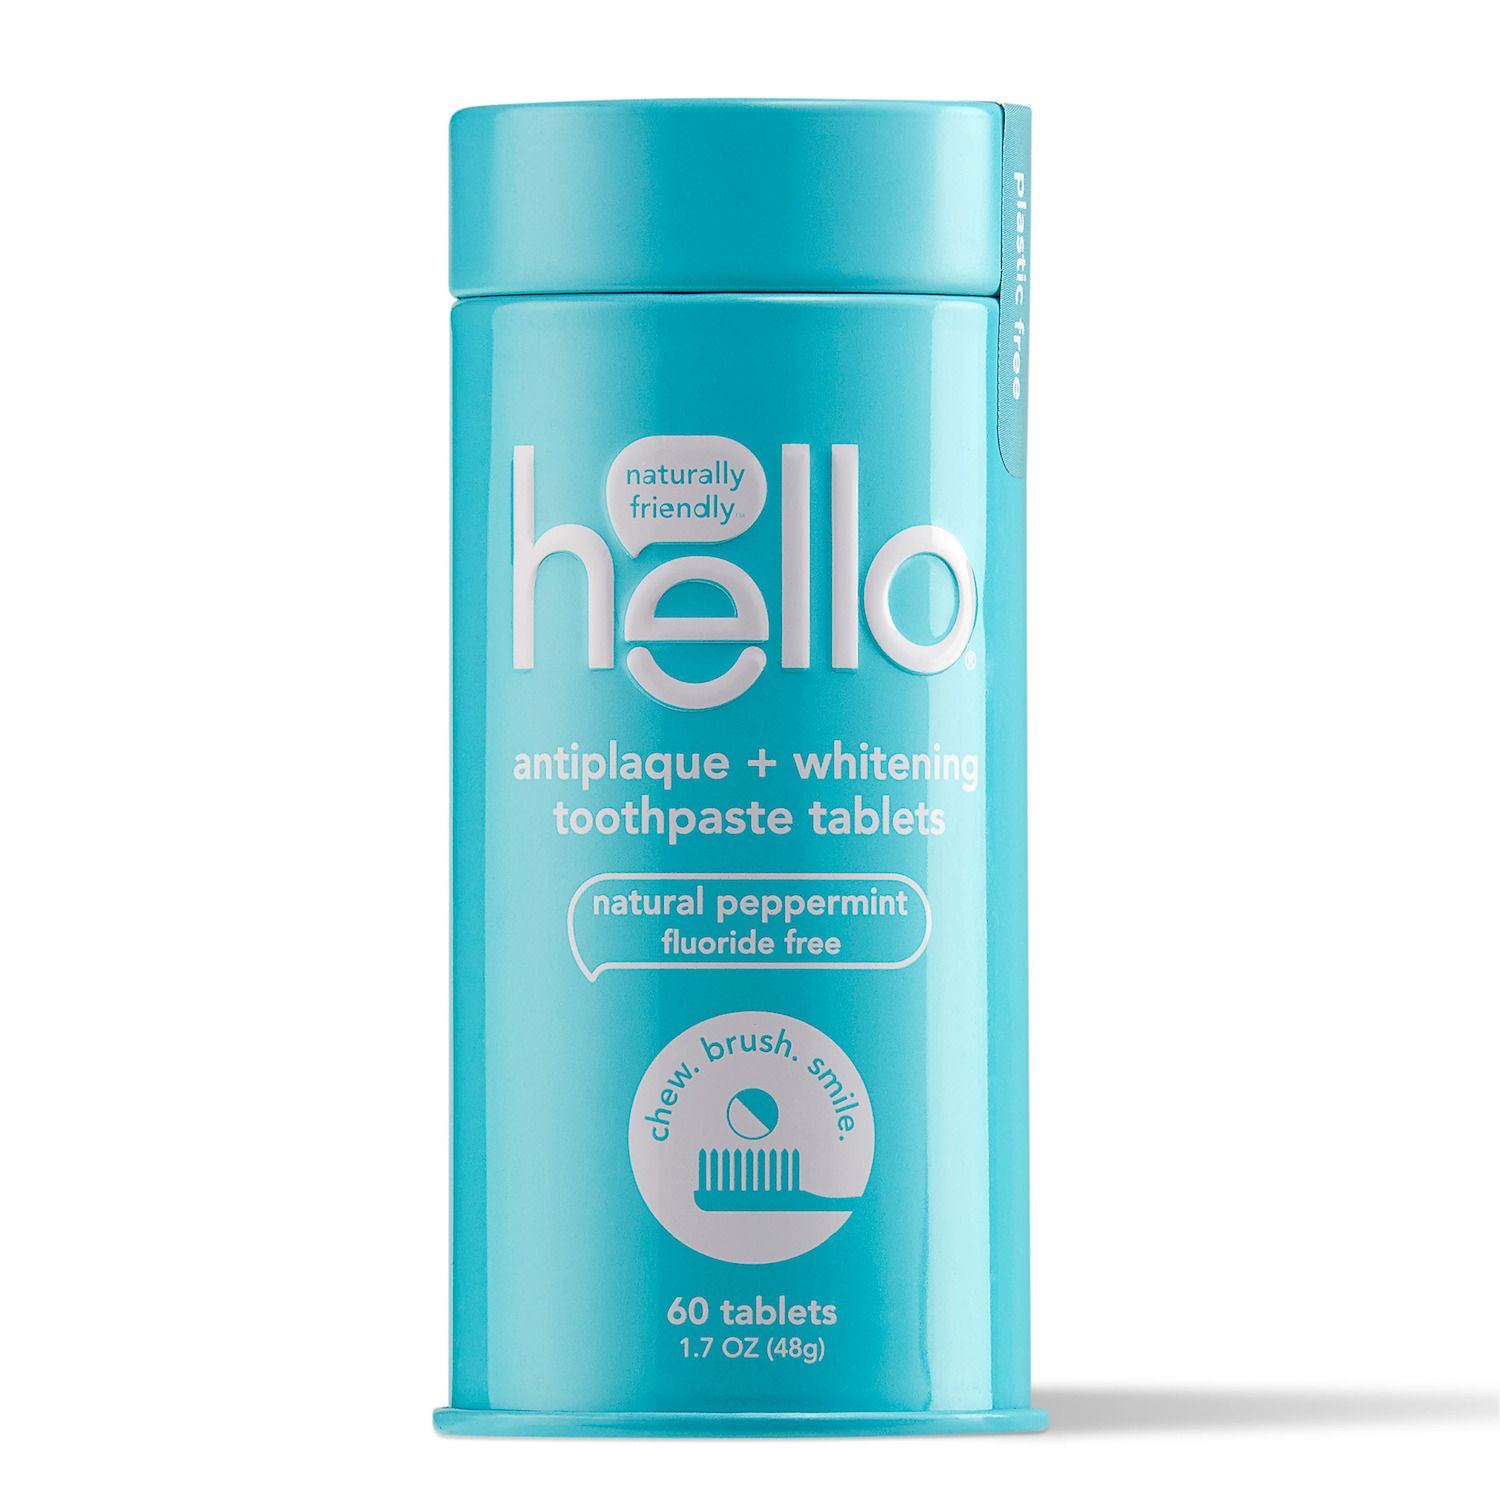 Image for hello Antiplaque + Whitening Toothpaste Tablets at Kohl's.